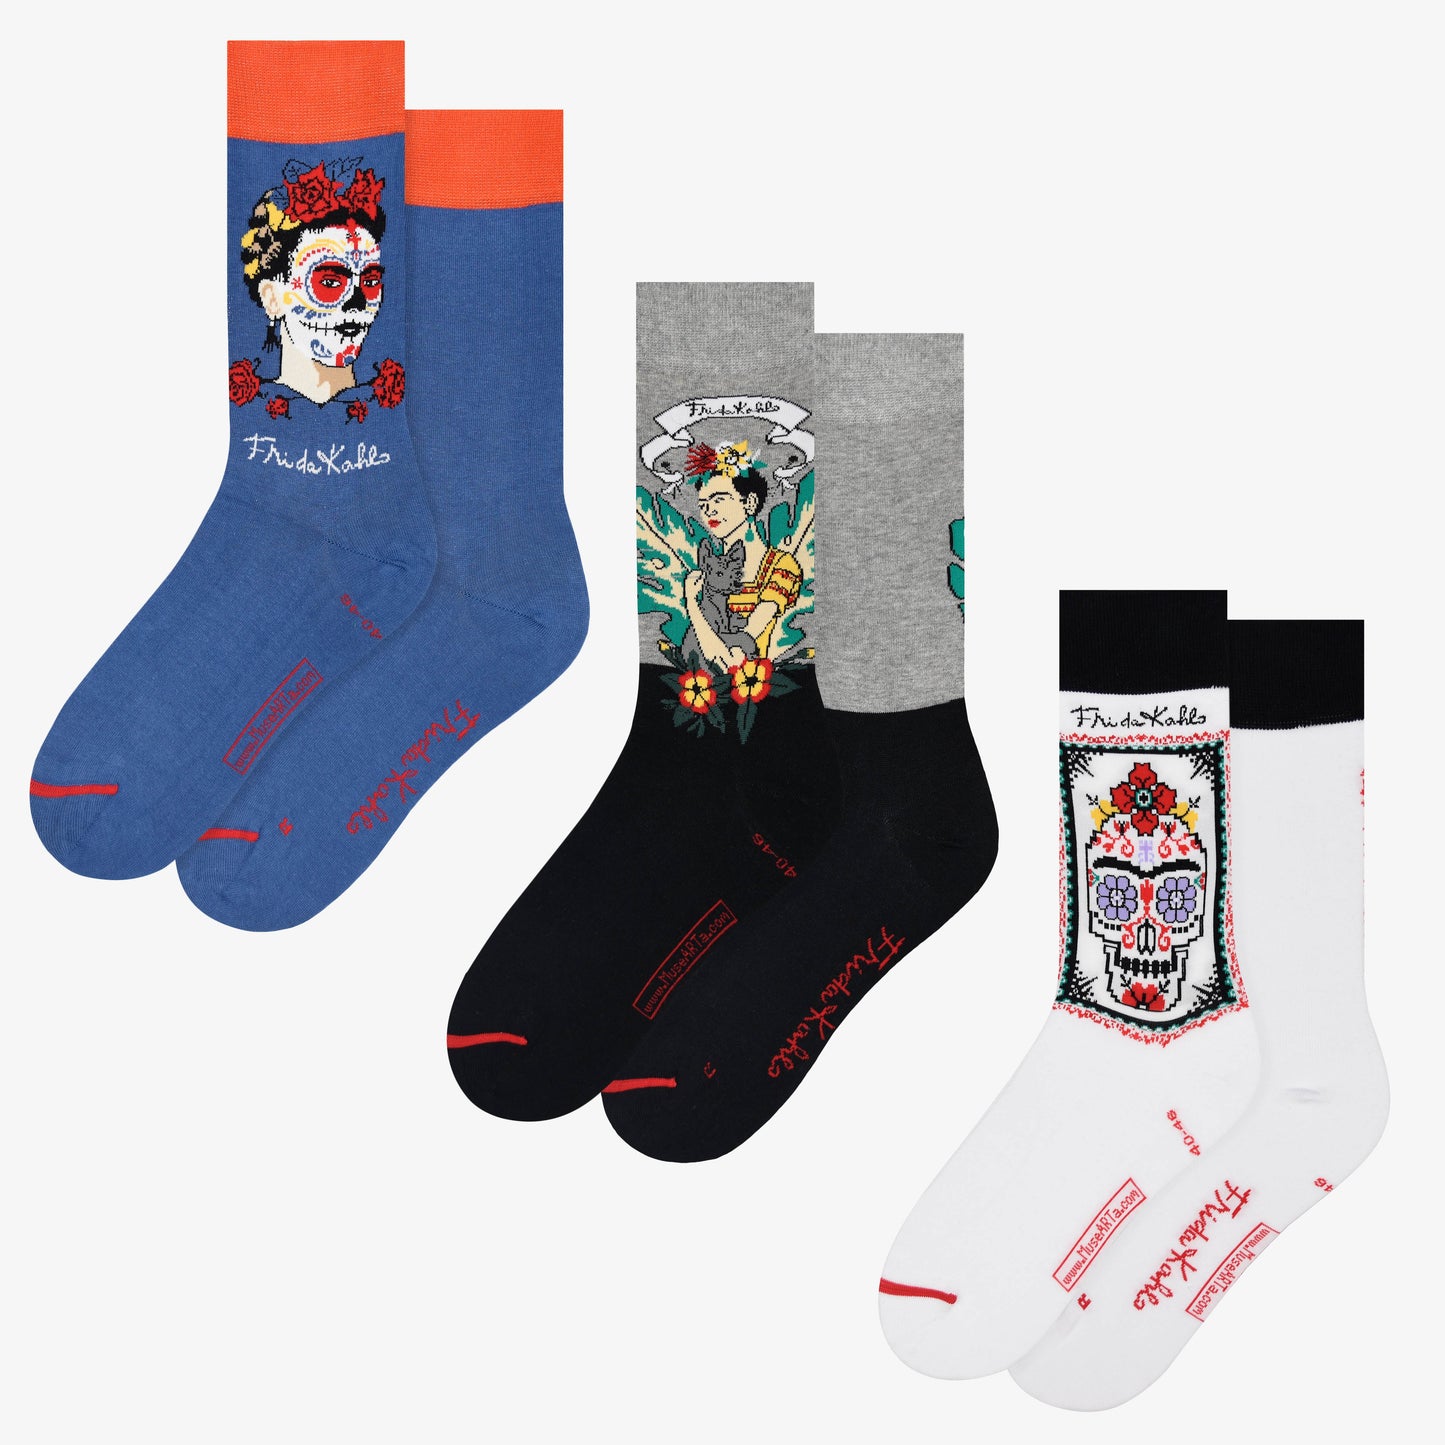 Frida Kahlo - Pack of 3 1 - The Day of the Dead + Frida with Dog + Skull of the Day of the Dead